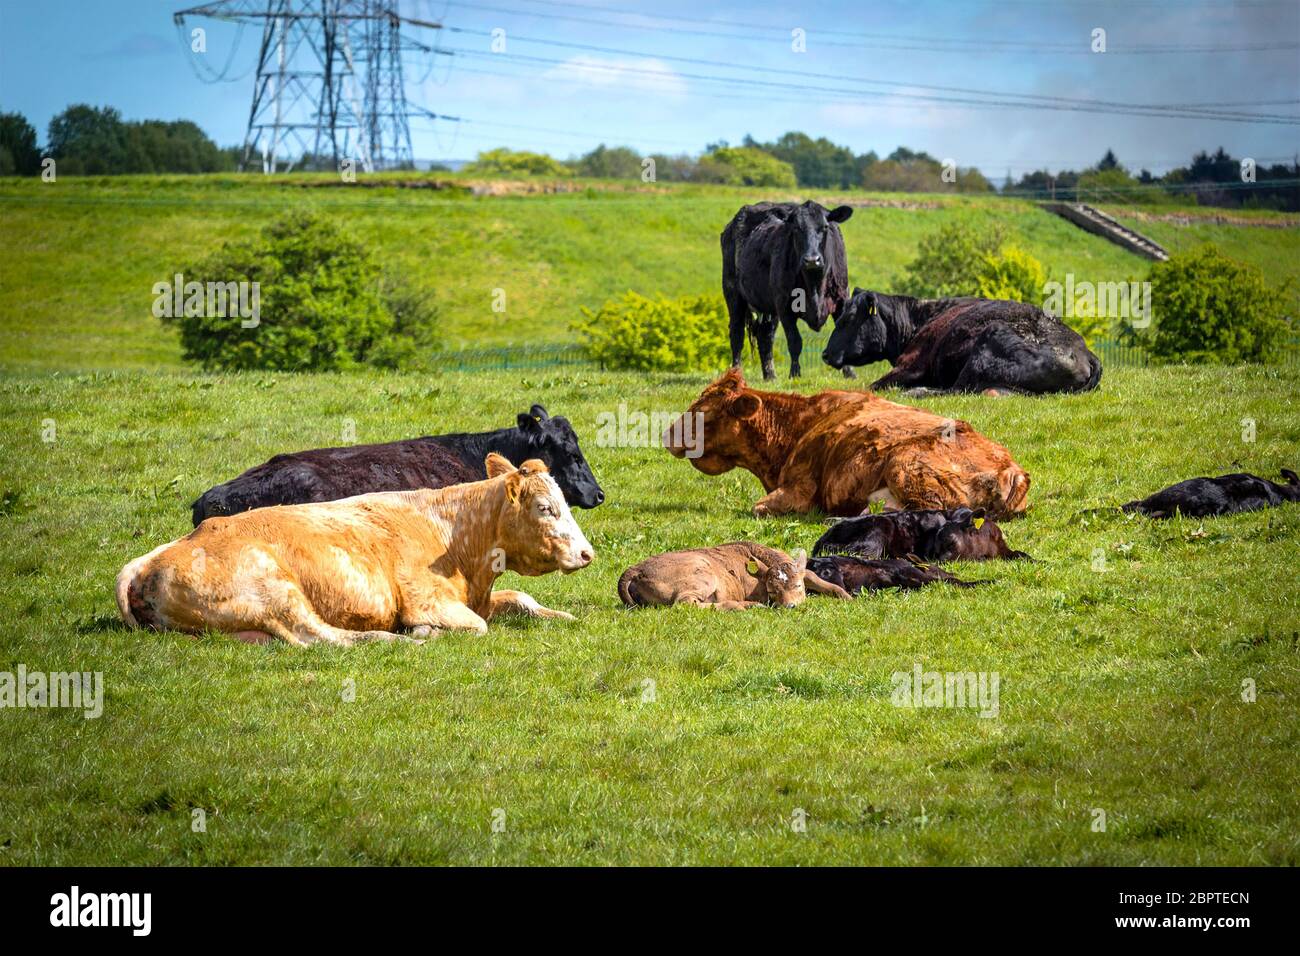 A herd of black and brown cows with young calves resting in the fields in Spring time, Glen Mavis, Scotland, UK Stock Photo